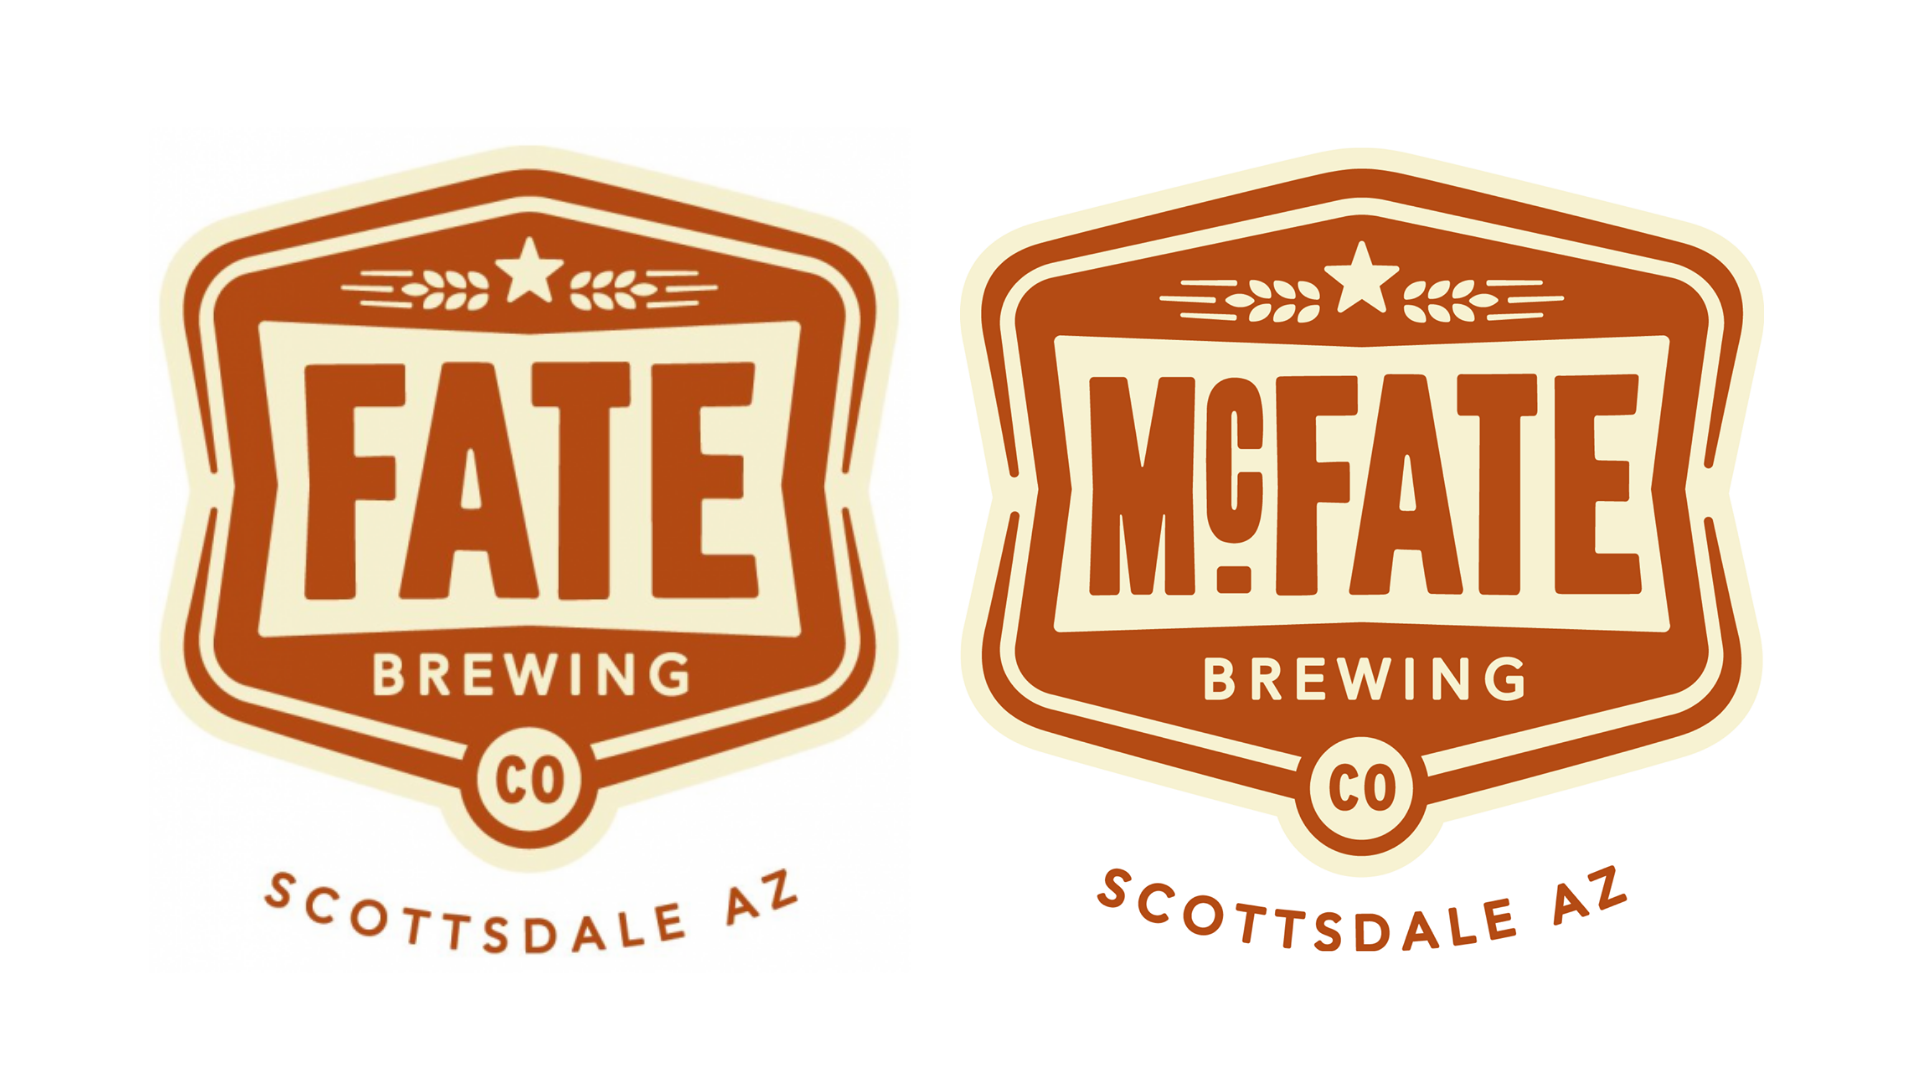 McFate Brewing Acquires the Rights to Fate Brewing Name